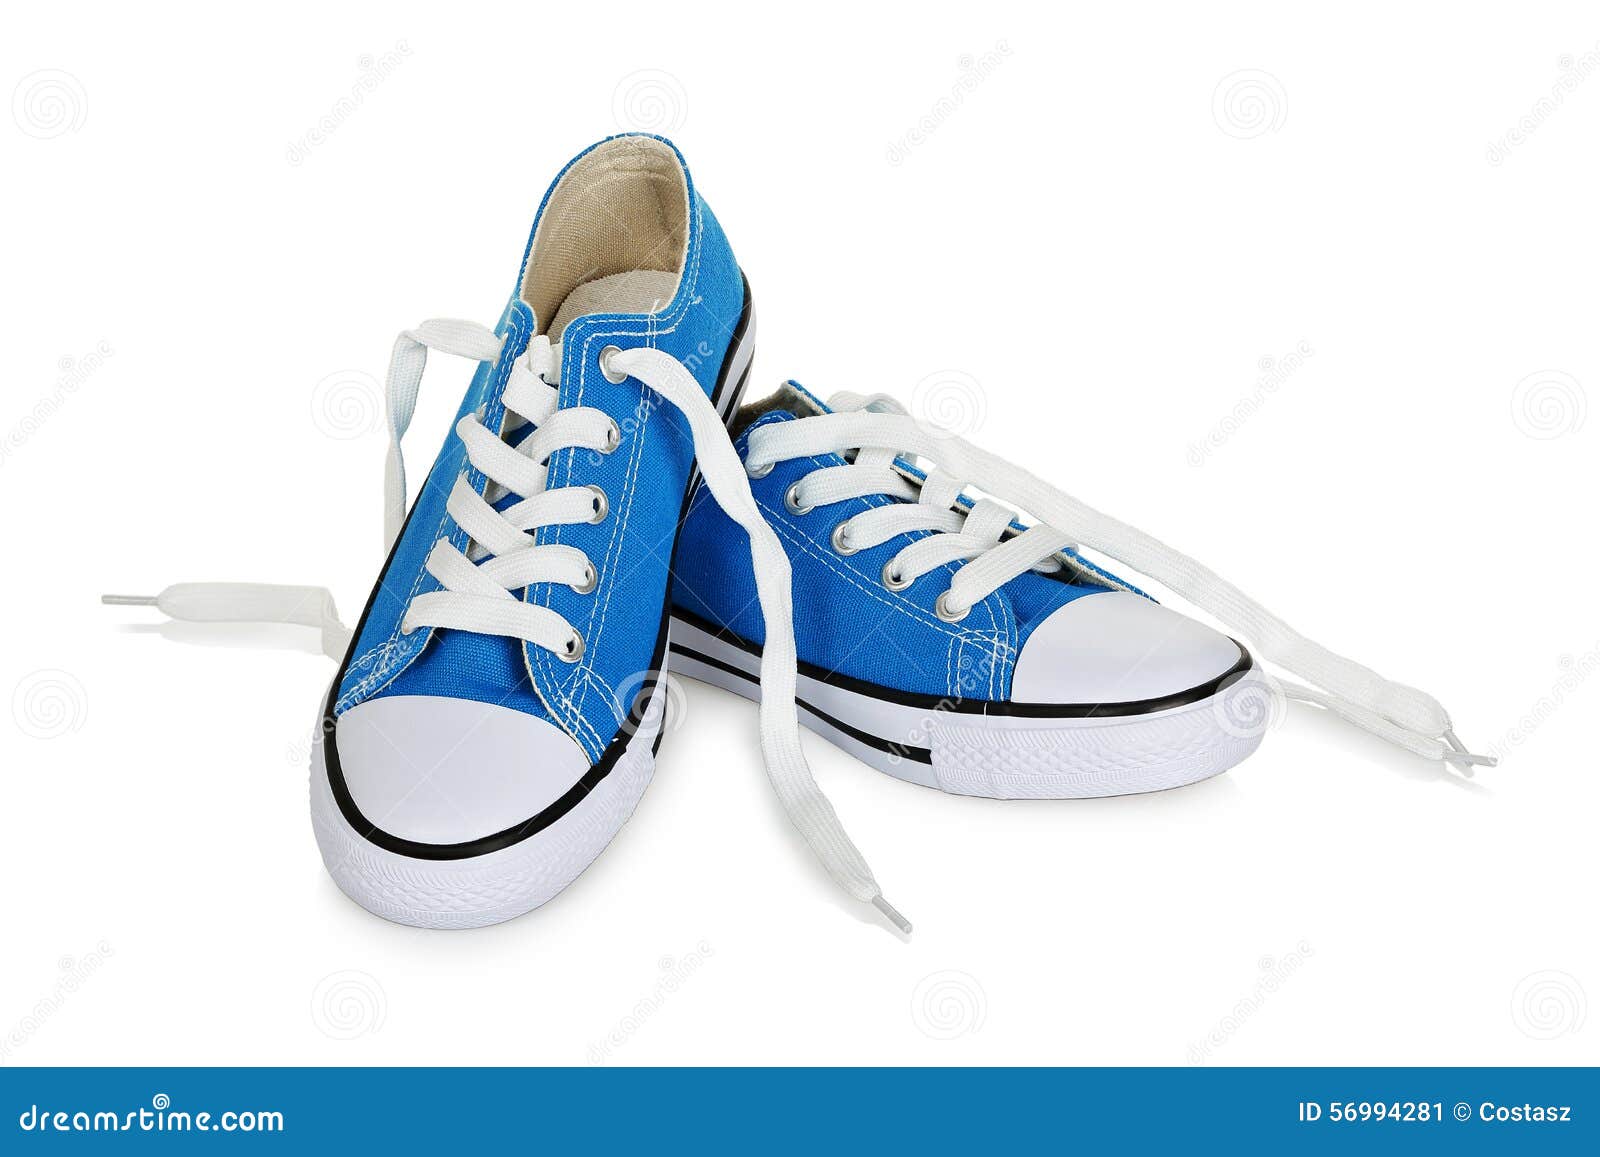 Sneakers stock image. Image of exercise, sport, fashionable - 56994281